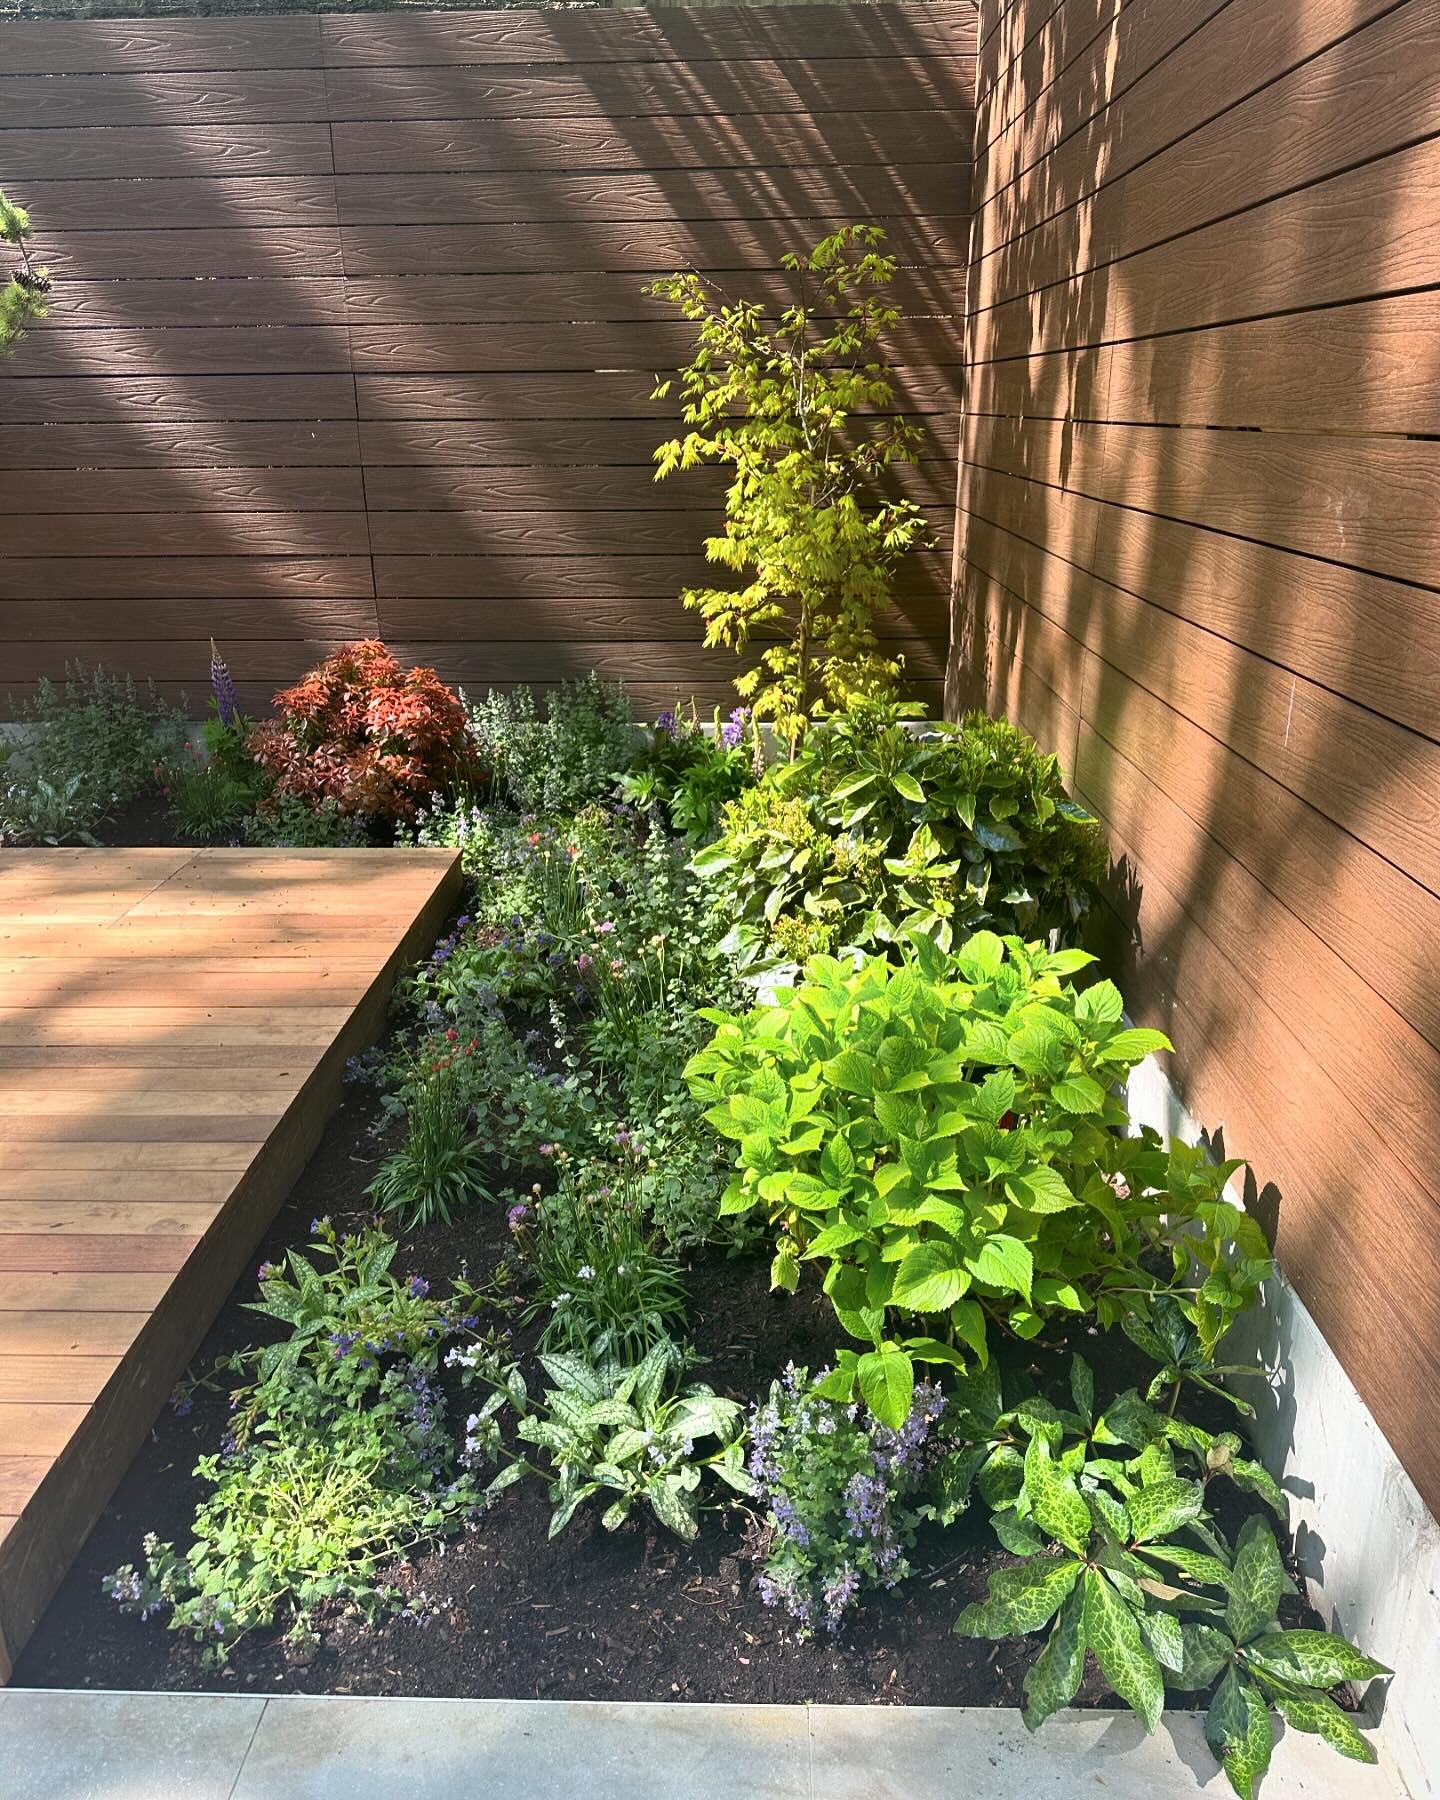 Occasionally, after we complete and interiors project, a client will ask for help with their outdoor space- and we just completed this Brooklyn backyard in time for the glory of spring! #brooklynbackyard #ipedecking #trellis #gardendesign #springtime